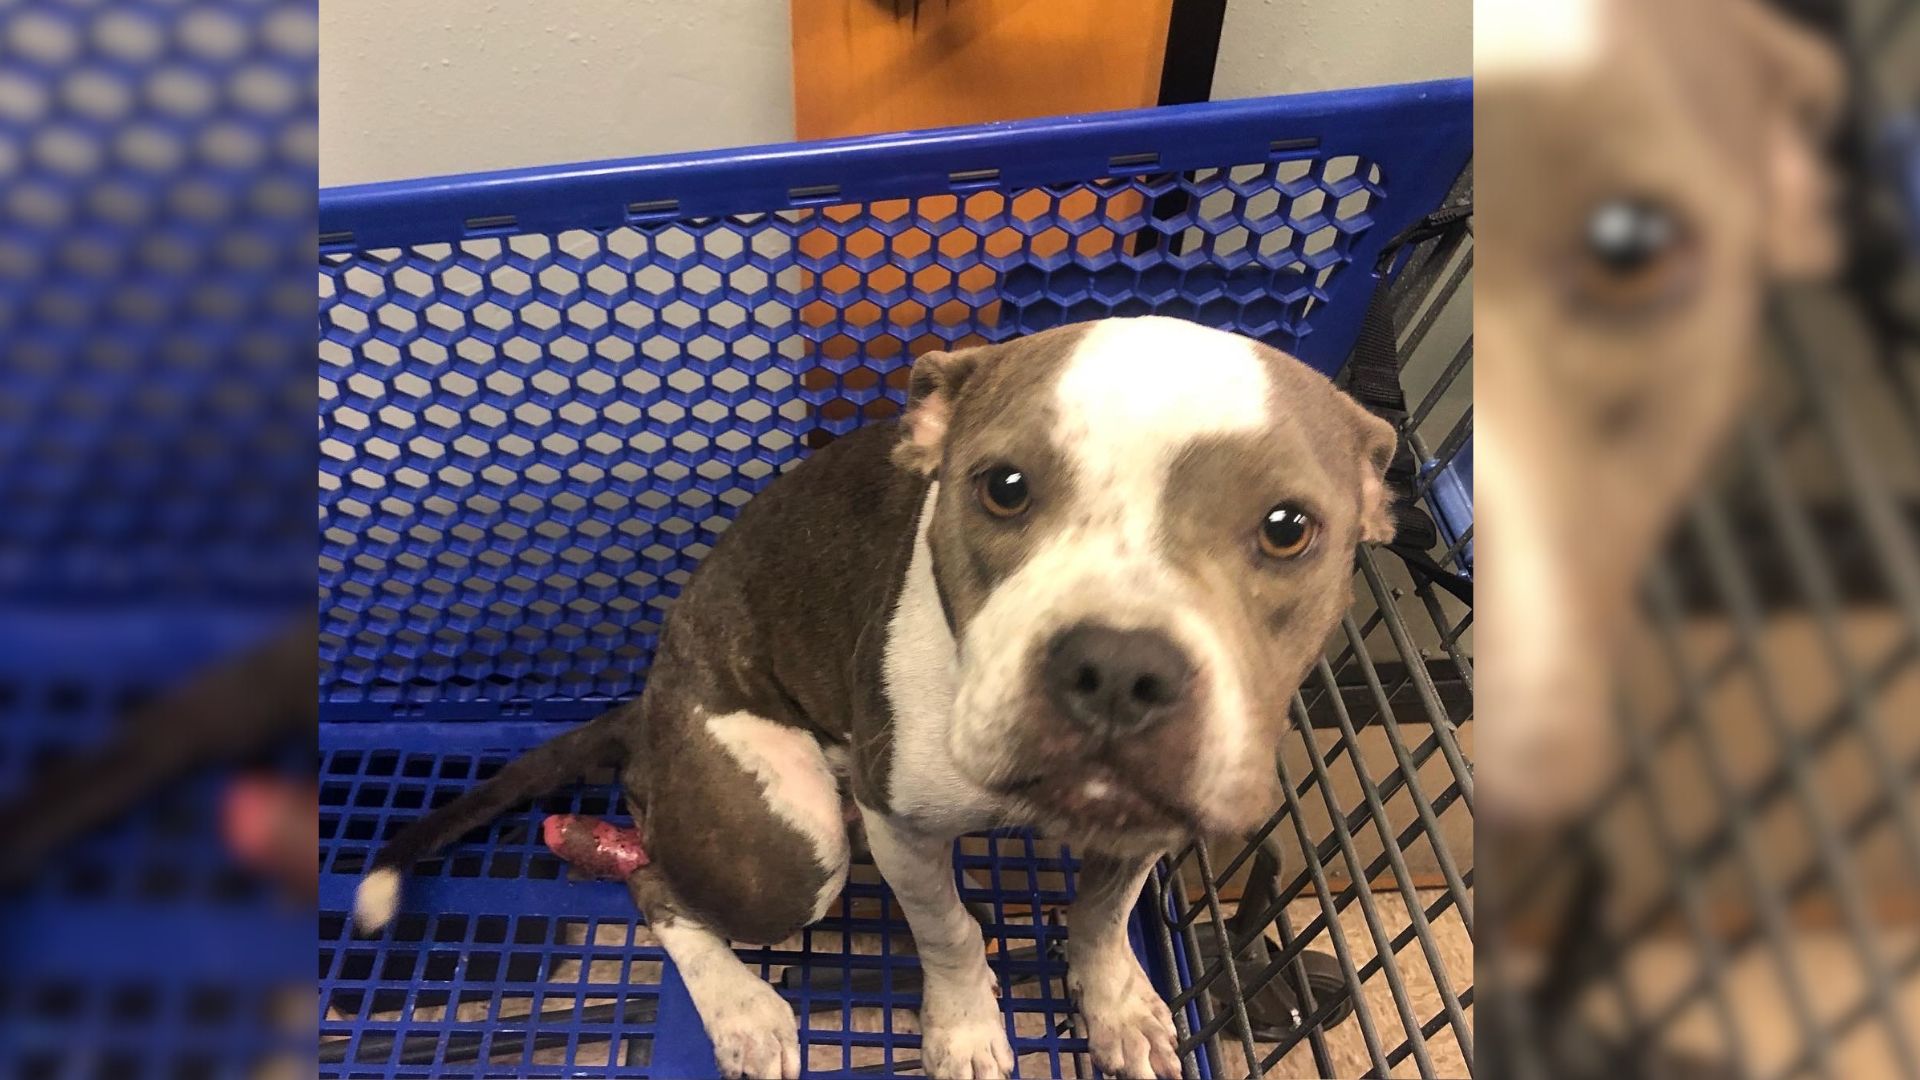 This Sweet Dog Was Left In A Shopping Cart Until An Employee Noticed Him